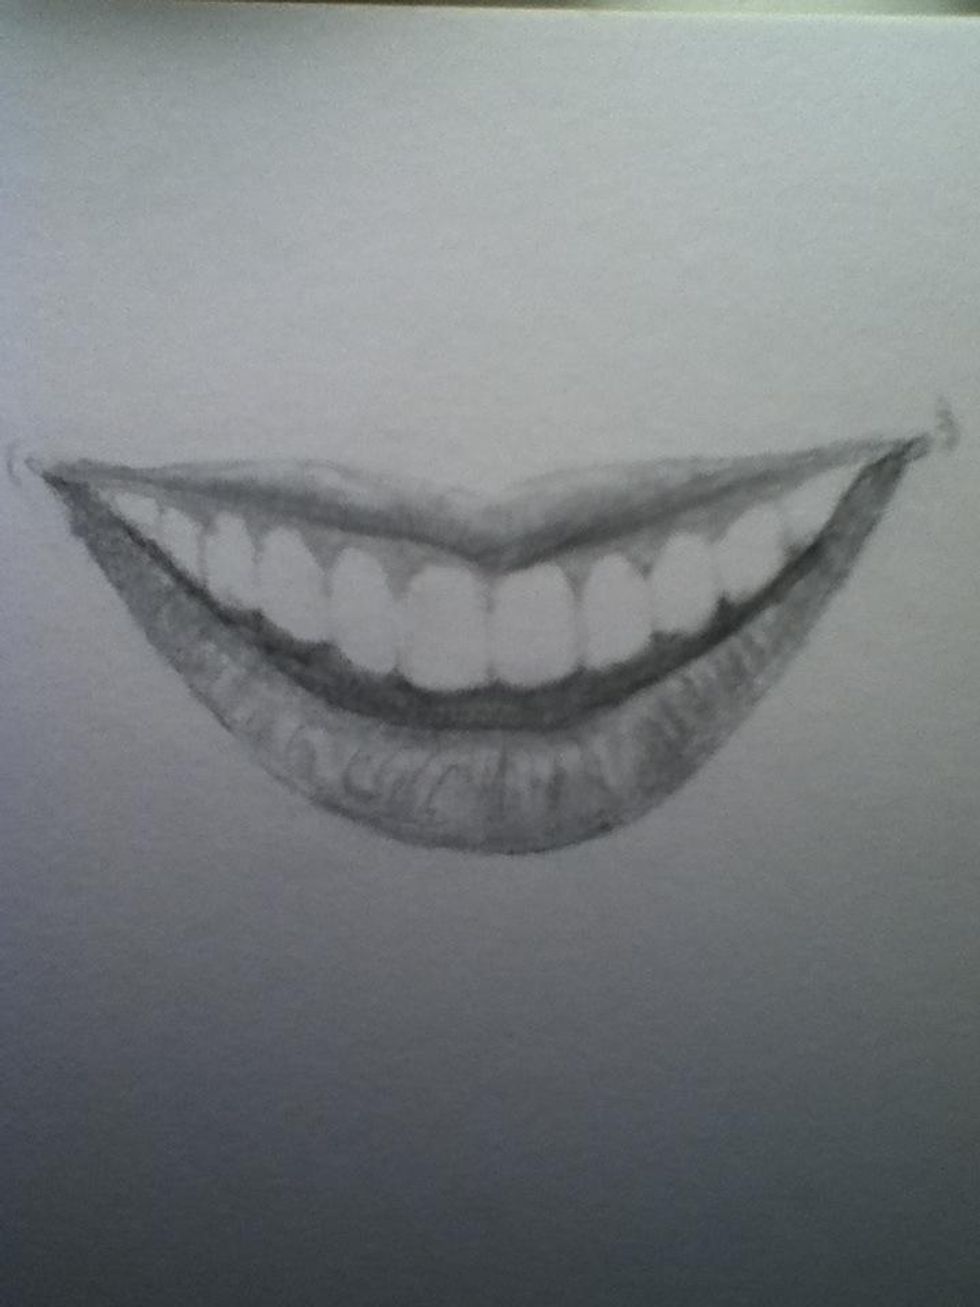 How to draw lips (with teeth) B+C Guides